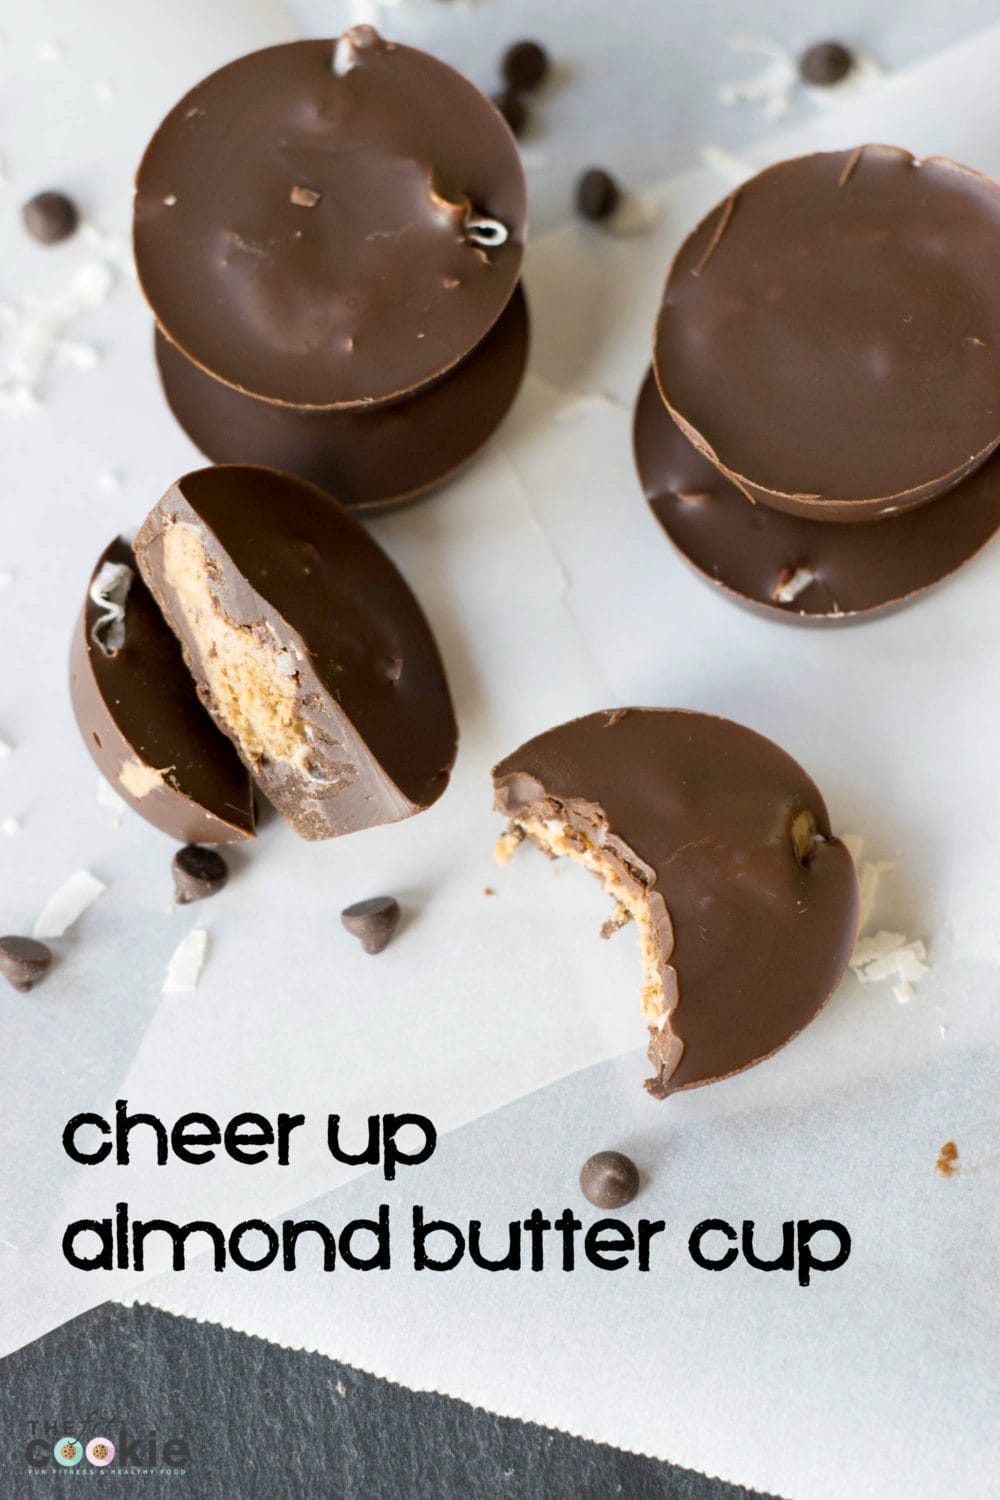 Crush cravings the healthy way! Cheer Up Almond Butter Cup recipe from The Sexyfit Method book (gluten free, vegan, and peanut free) - @TheFitCookie #healthy